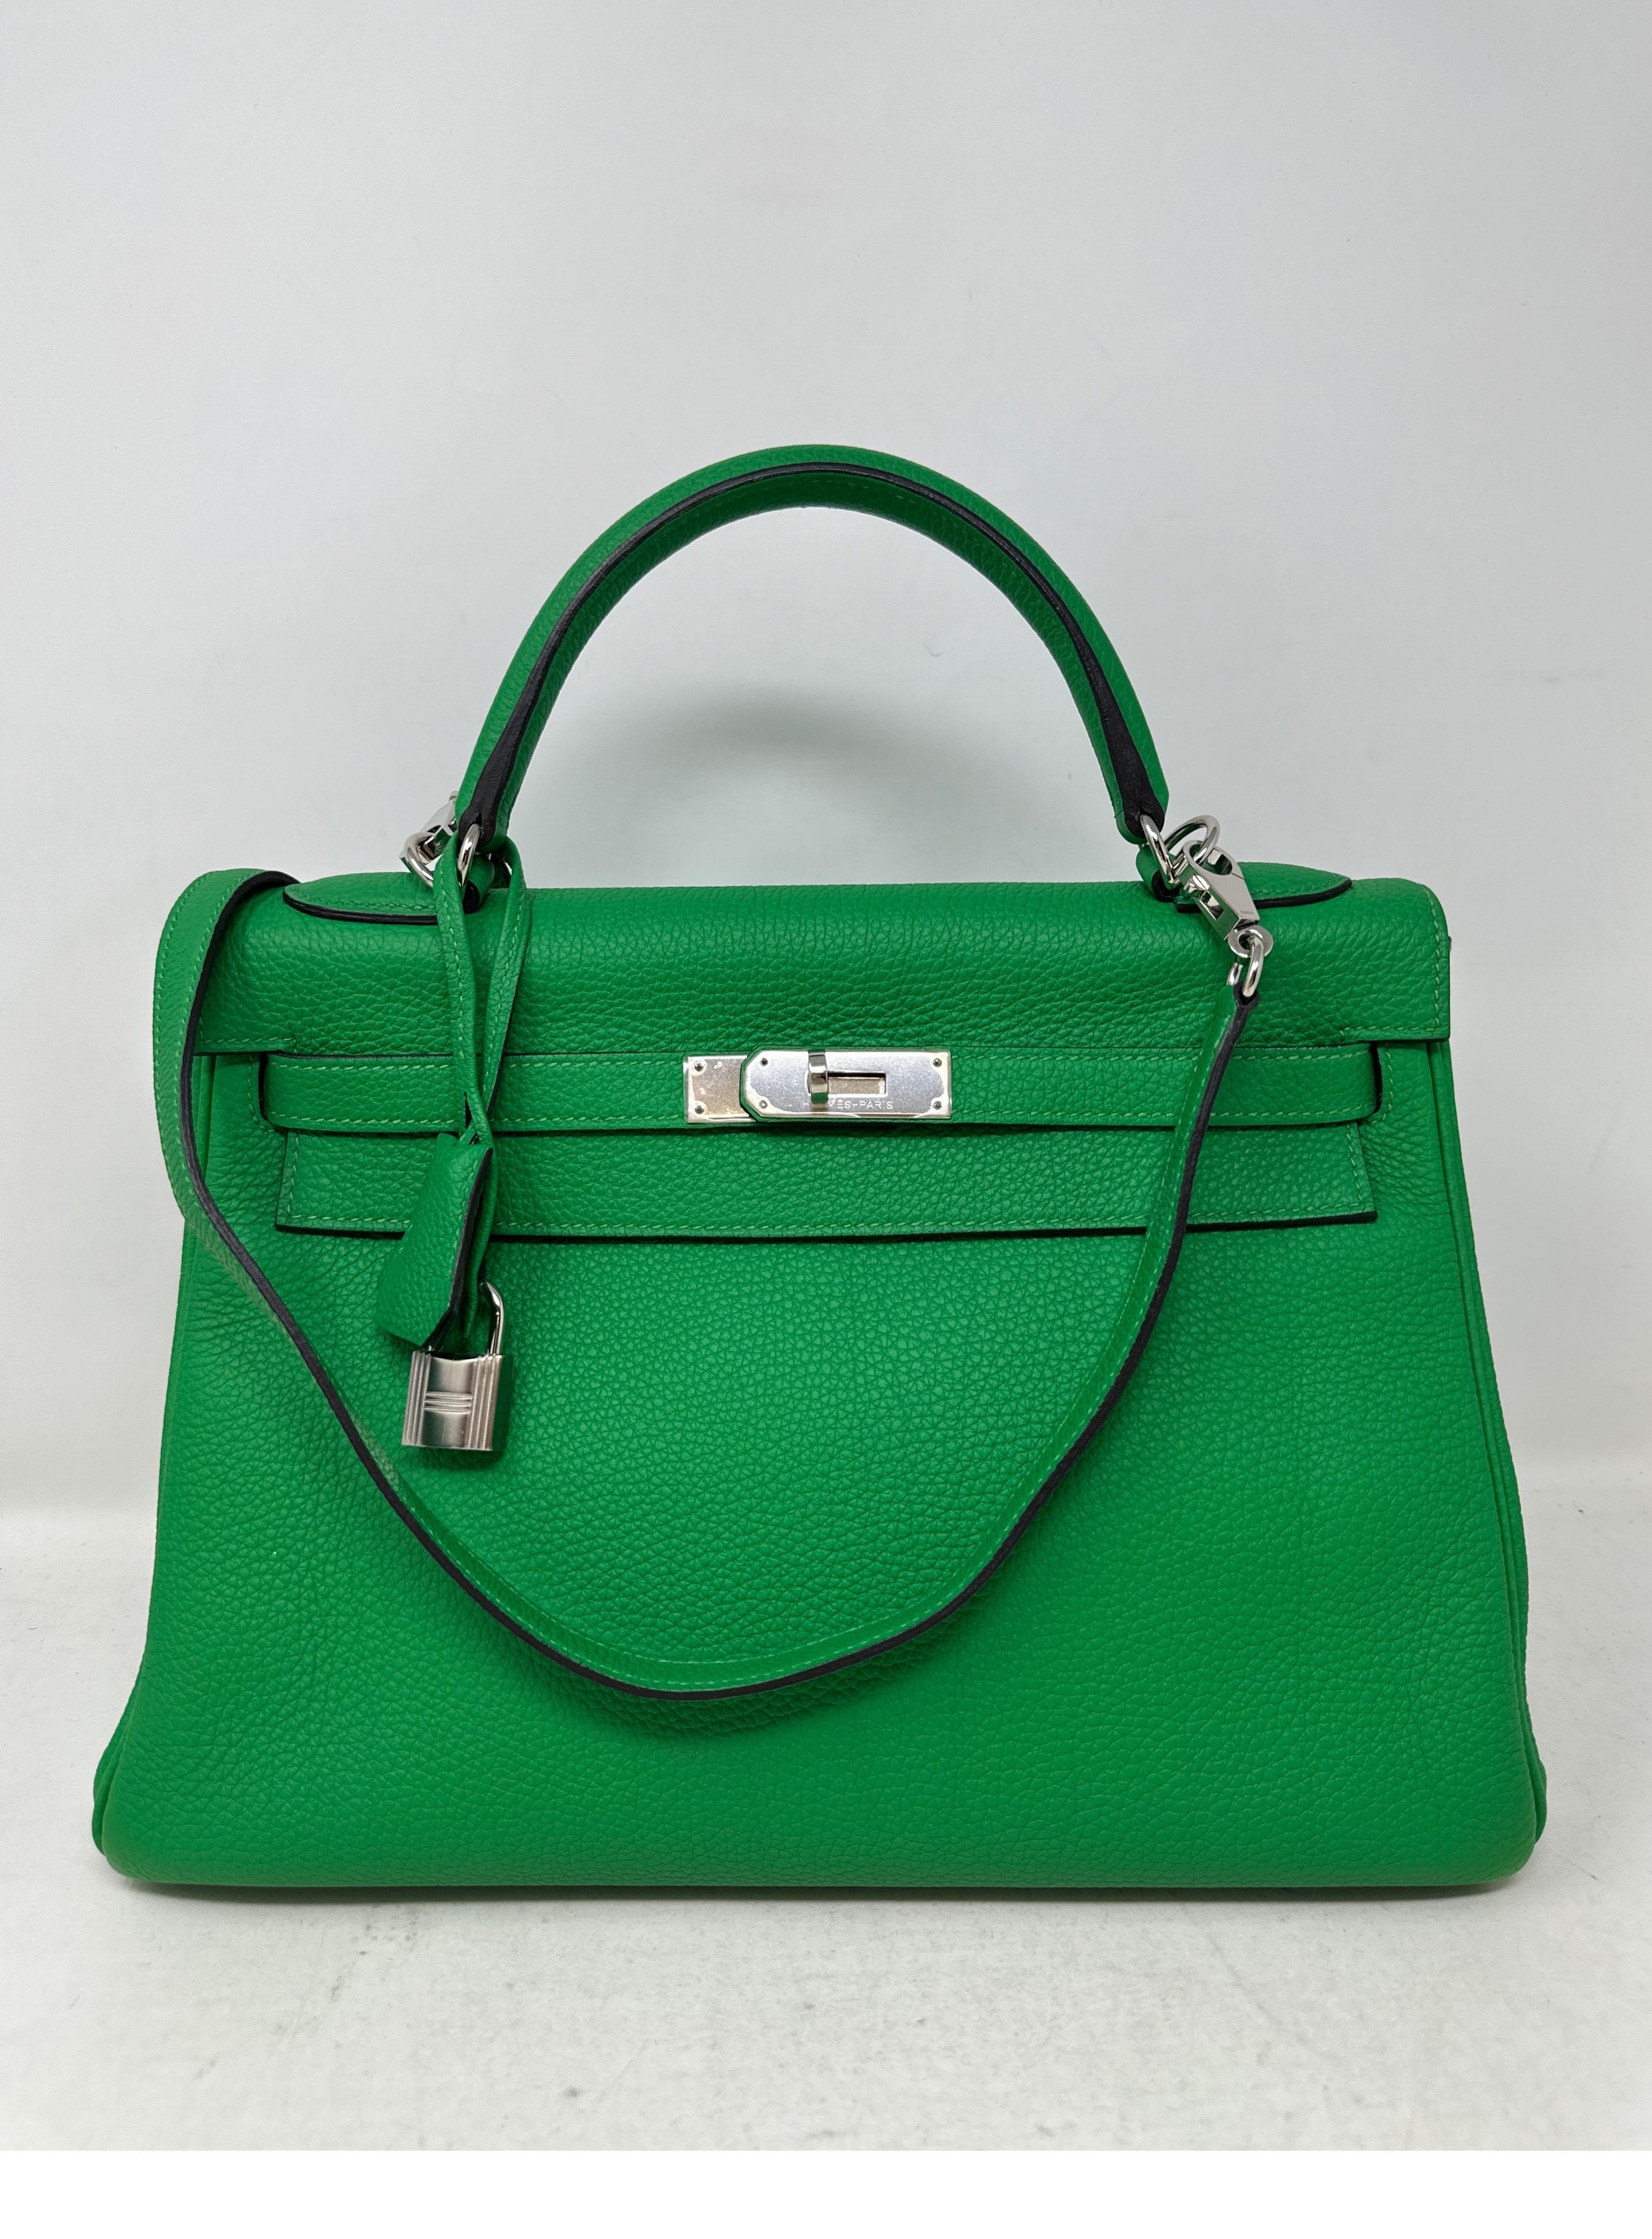 Hermes Bamboo Kelly 35 Bag  In Excellent Condition For Sale In Athens, GA